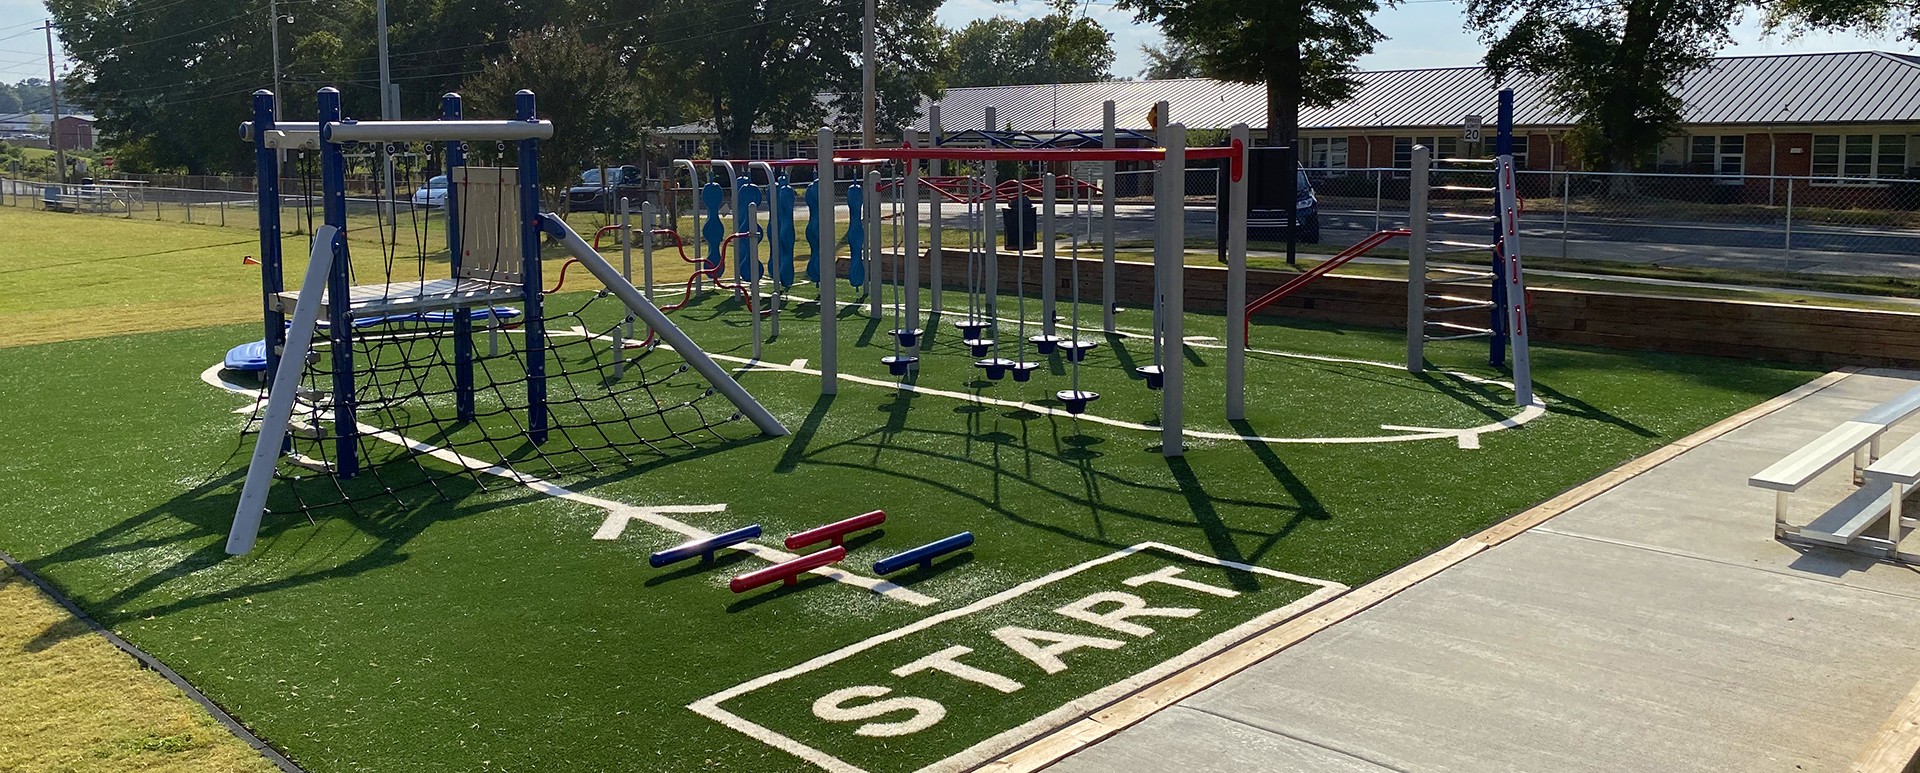 Featured image of soccer net on green turn next to outdoor play equipment